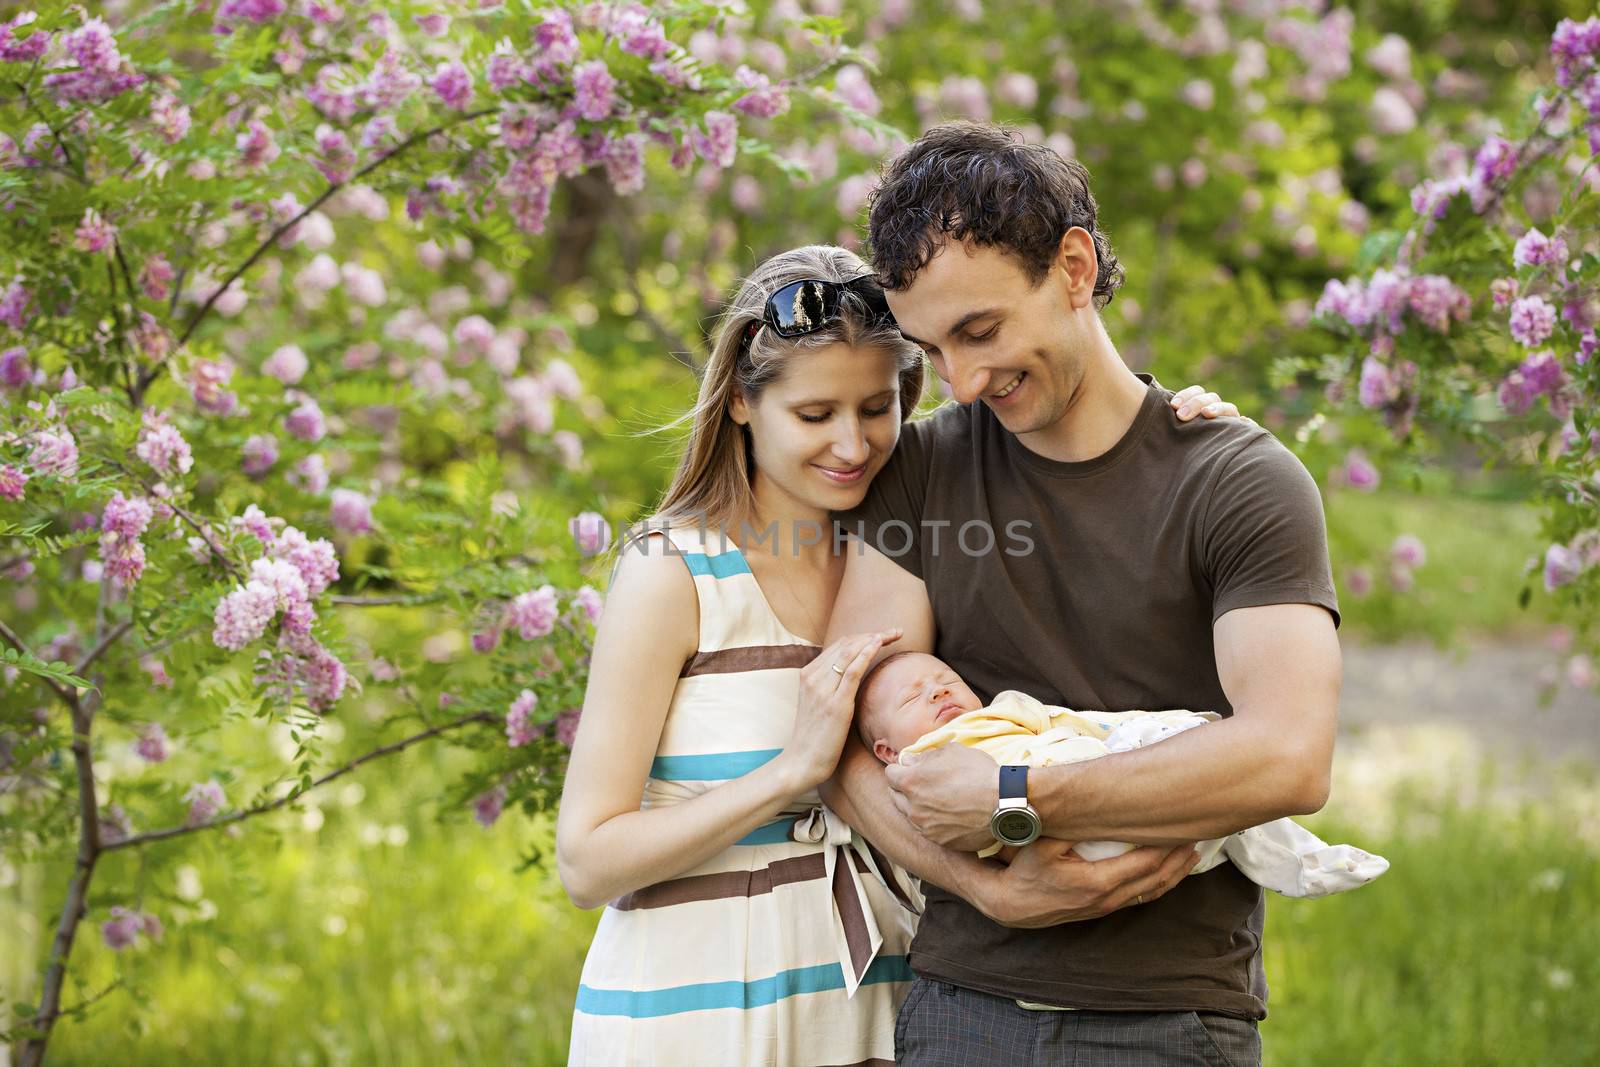 Young couple with newborn son outdoors in spring